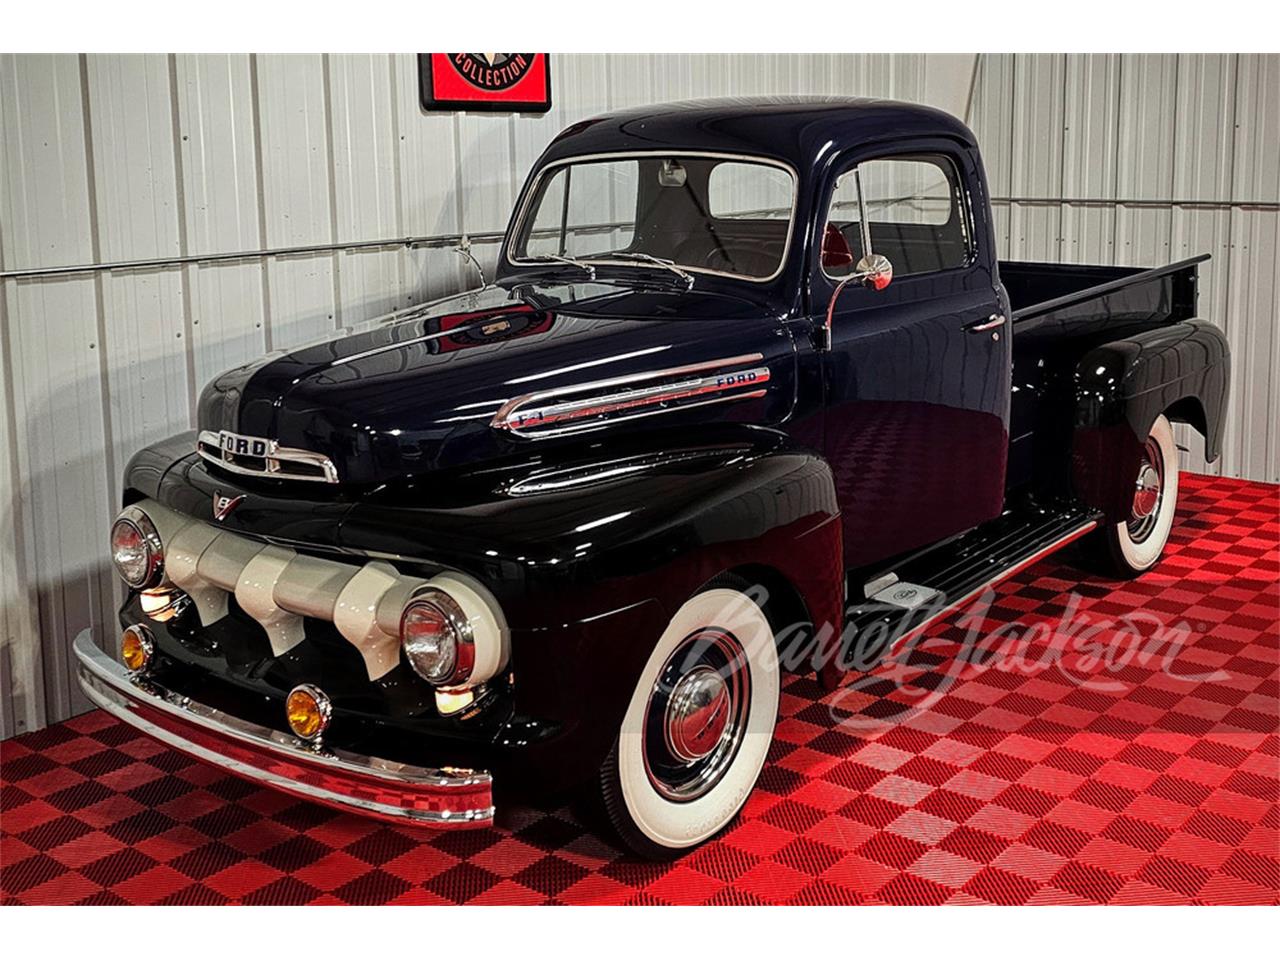 For Sale at Auction: 1951 Ford F100 in Scottsdale, Arizona for sale in Scottsdale, AZ